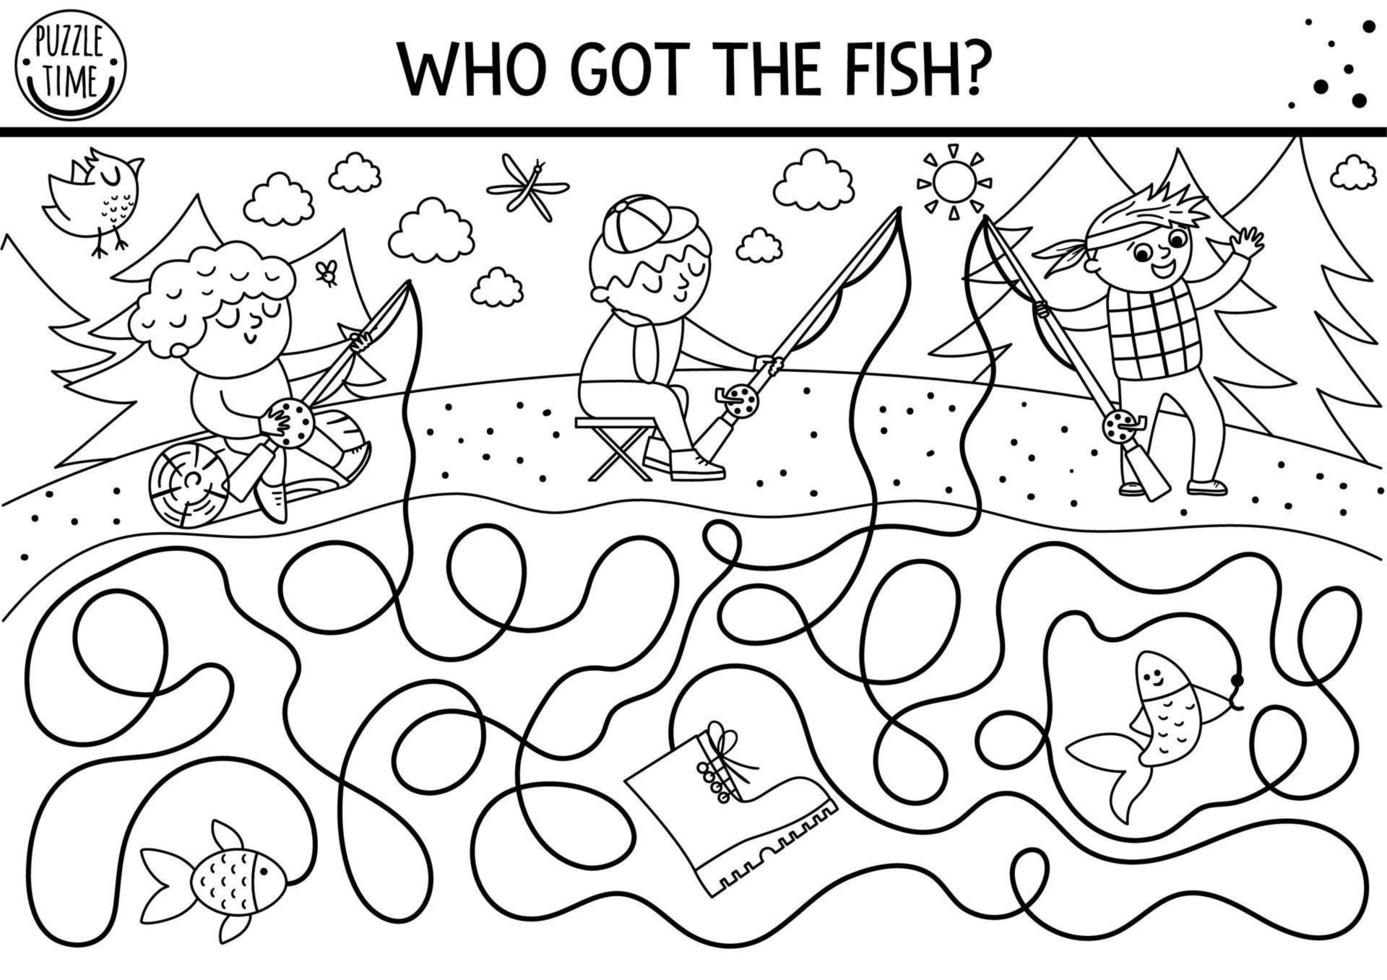 Black and white summer camp maze for children. Active holidays outline preschool printable activity. Family nature trip labyrinth coloring page with cute fishing kids with rods. Who got the fish vector